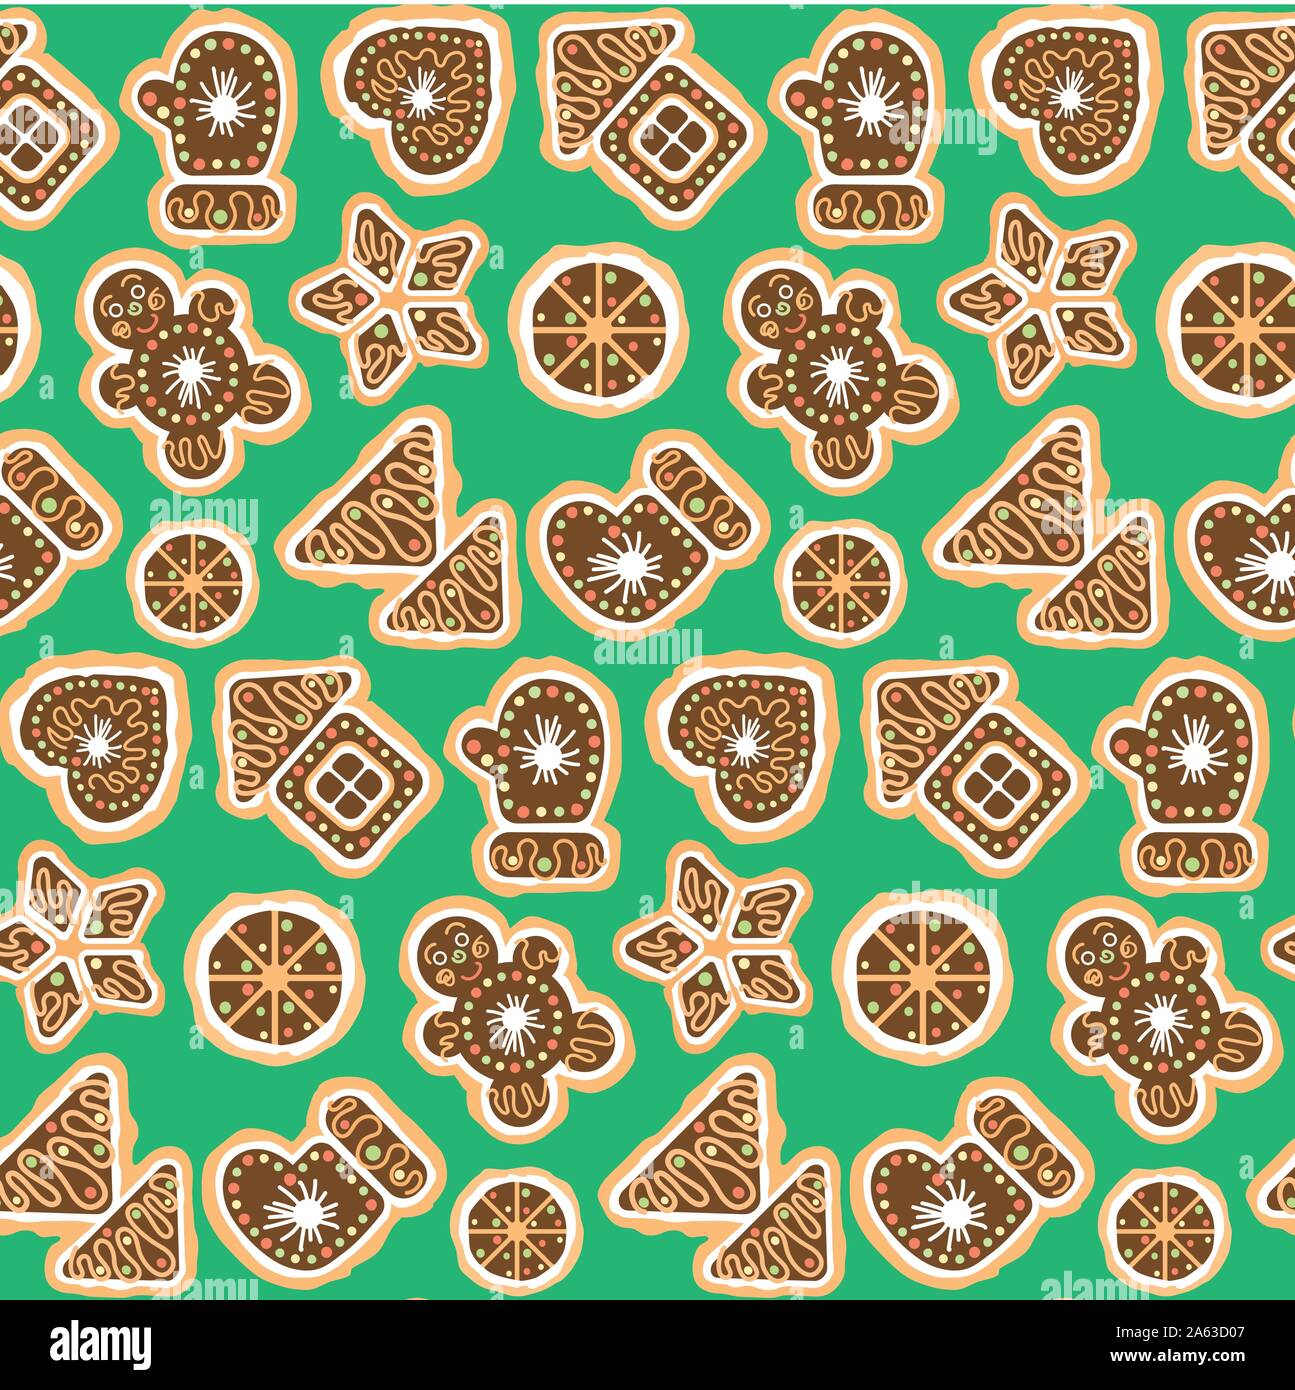 Christmas Cookies Seamless Background Patterns. Stock Vector